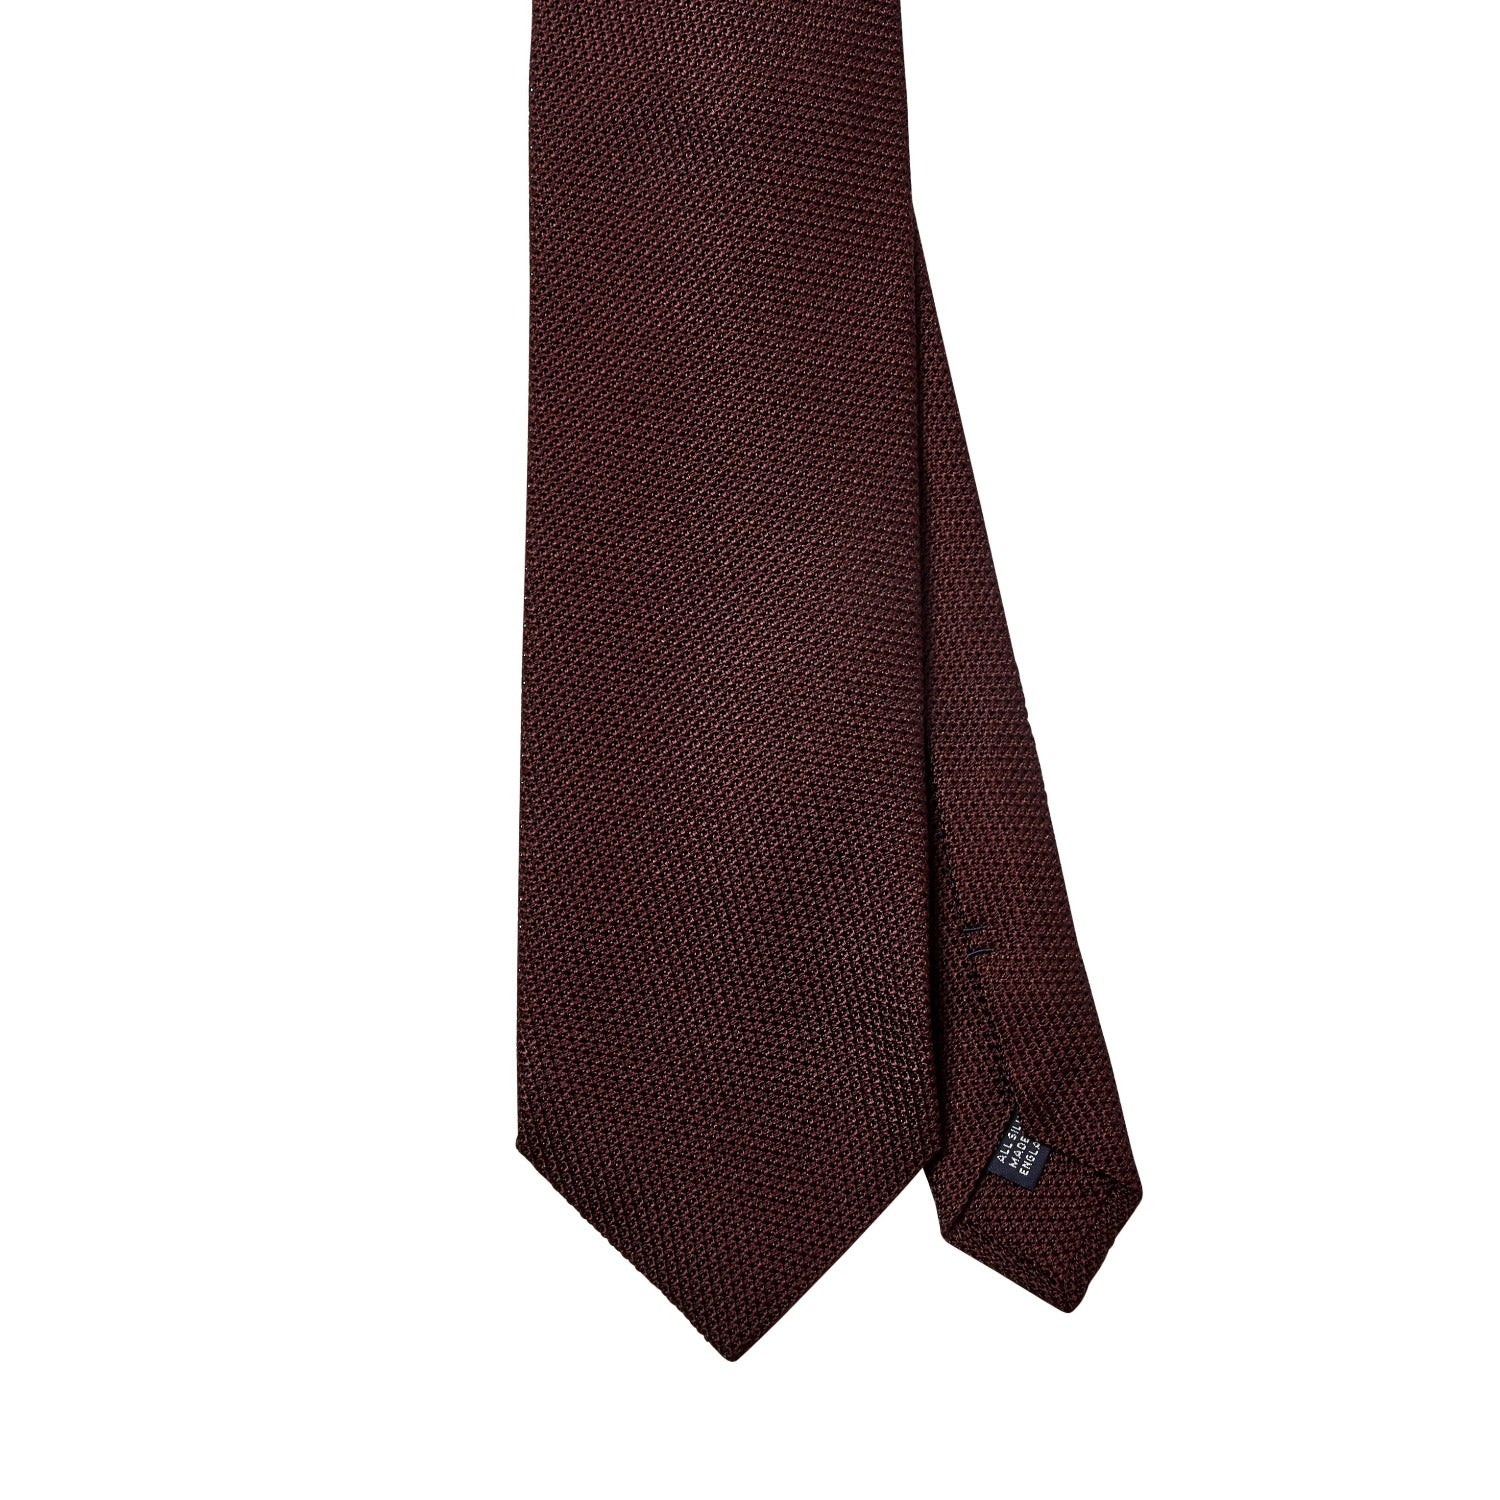 A Sovereign Grade Grenadine Fina Burgundy Tie by KirbyAllison.com on a white background, sourced from the United Kingdom.